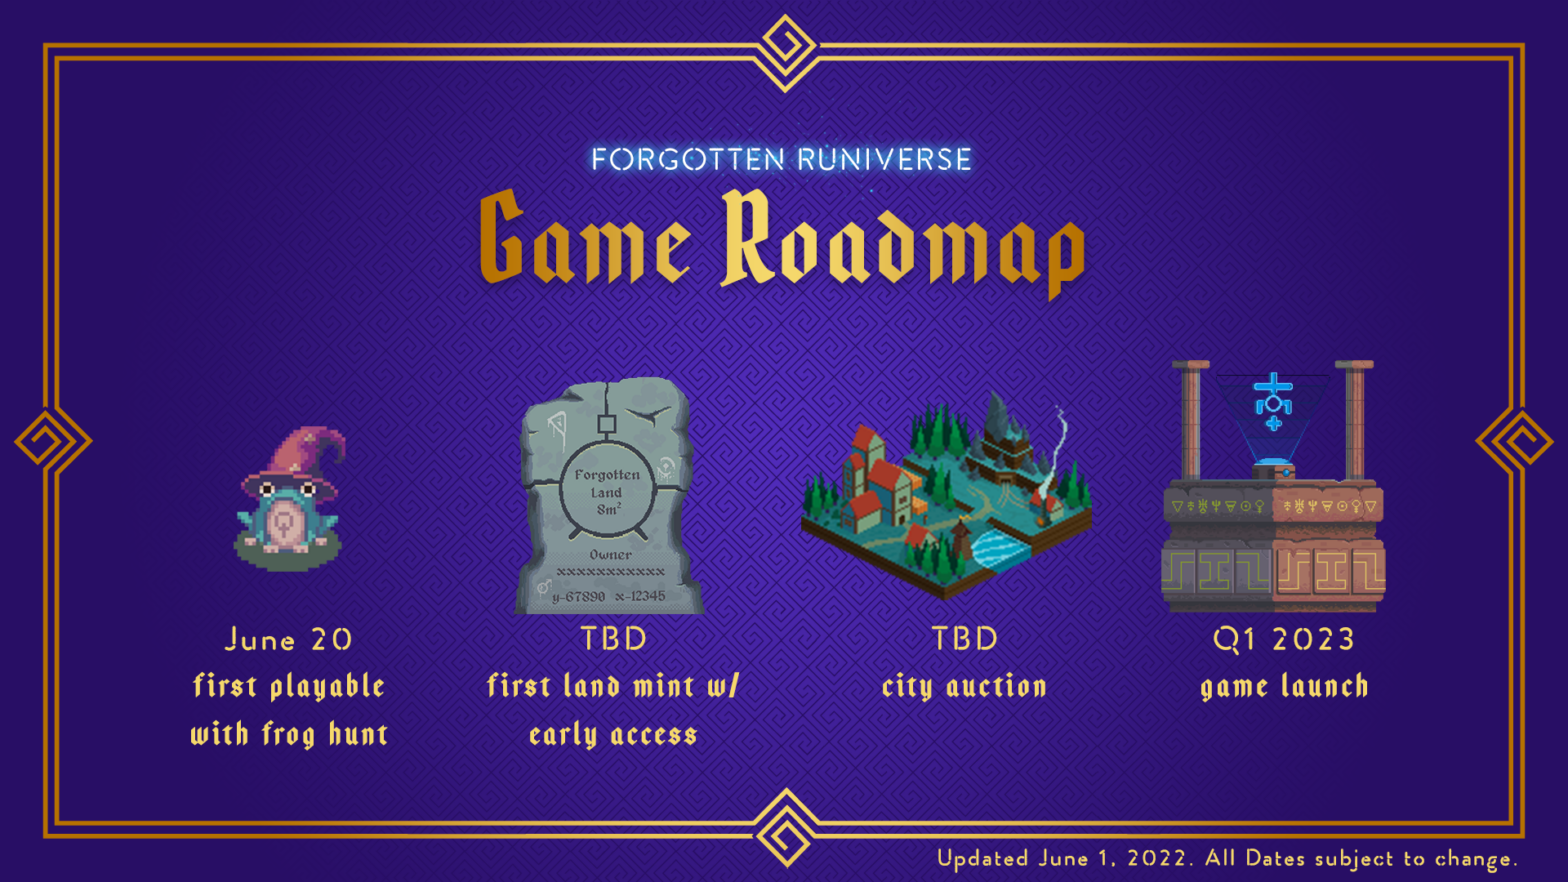 Roadmap Content - June 20 Frist Playable with Frog Hunt then TBD land mint, early access, city auction and game launch.